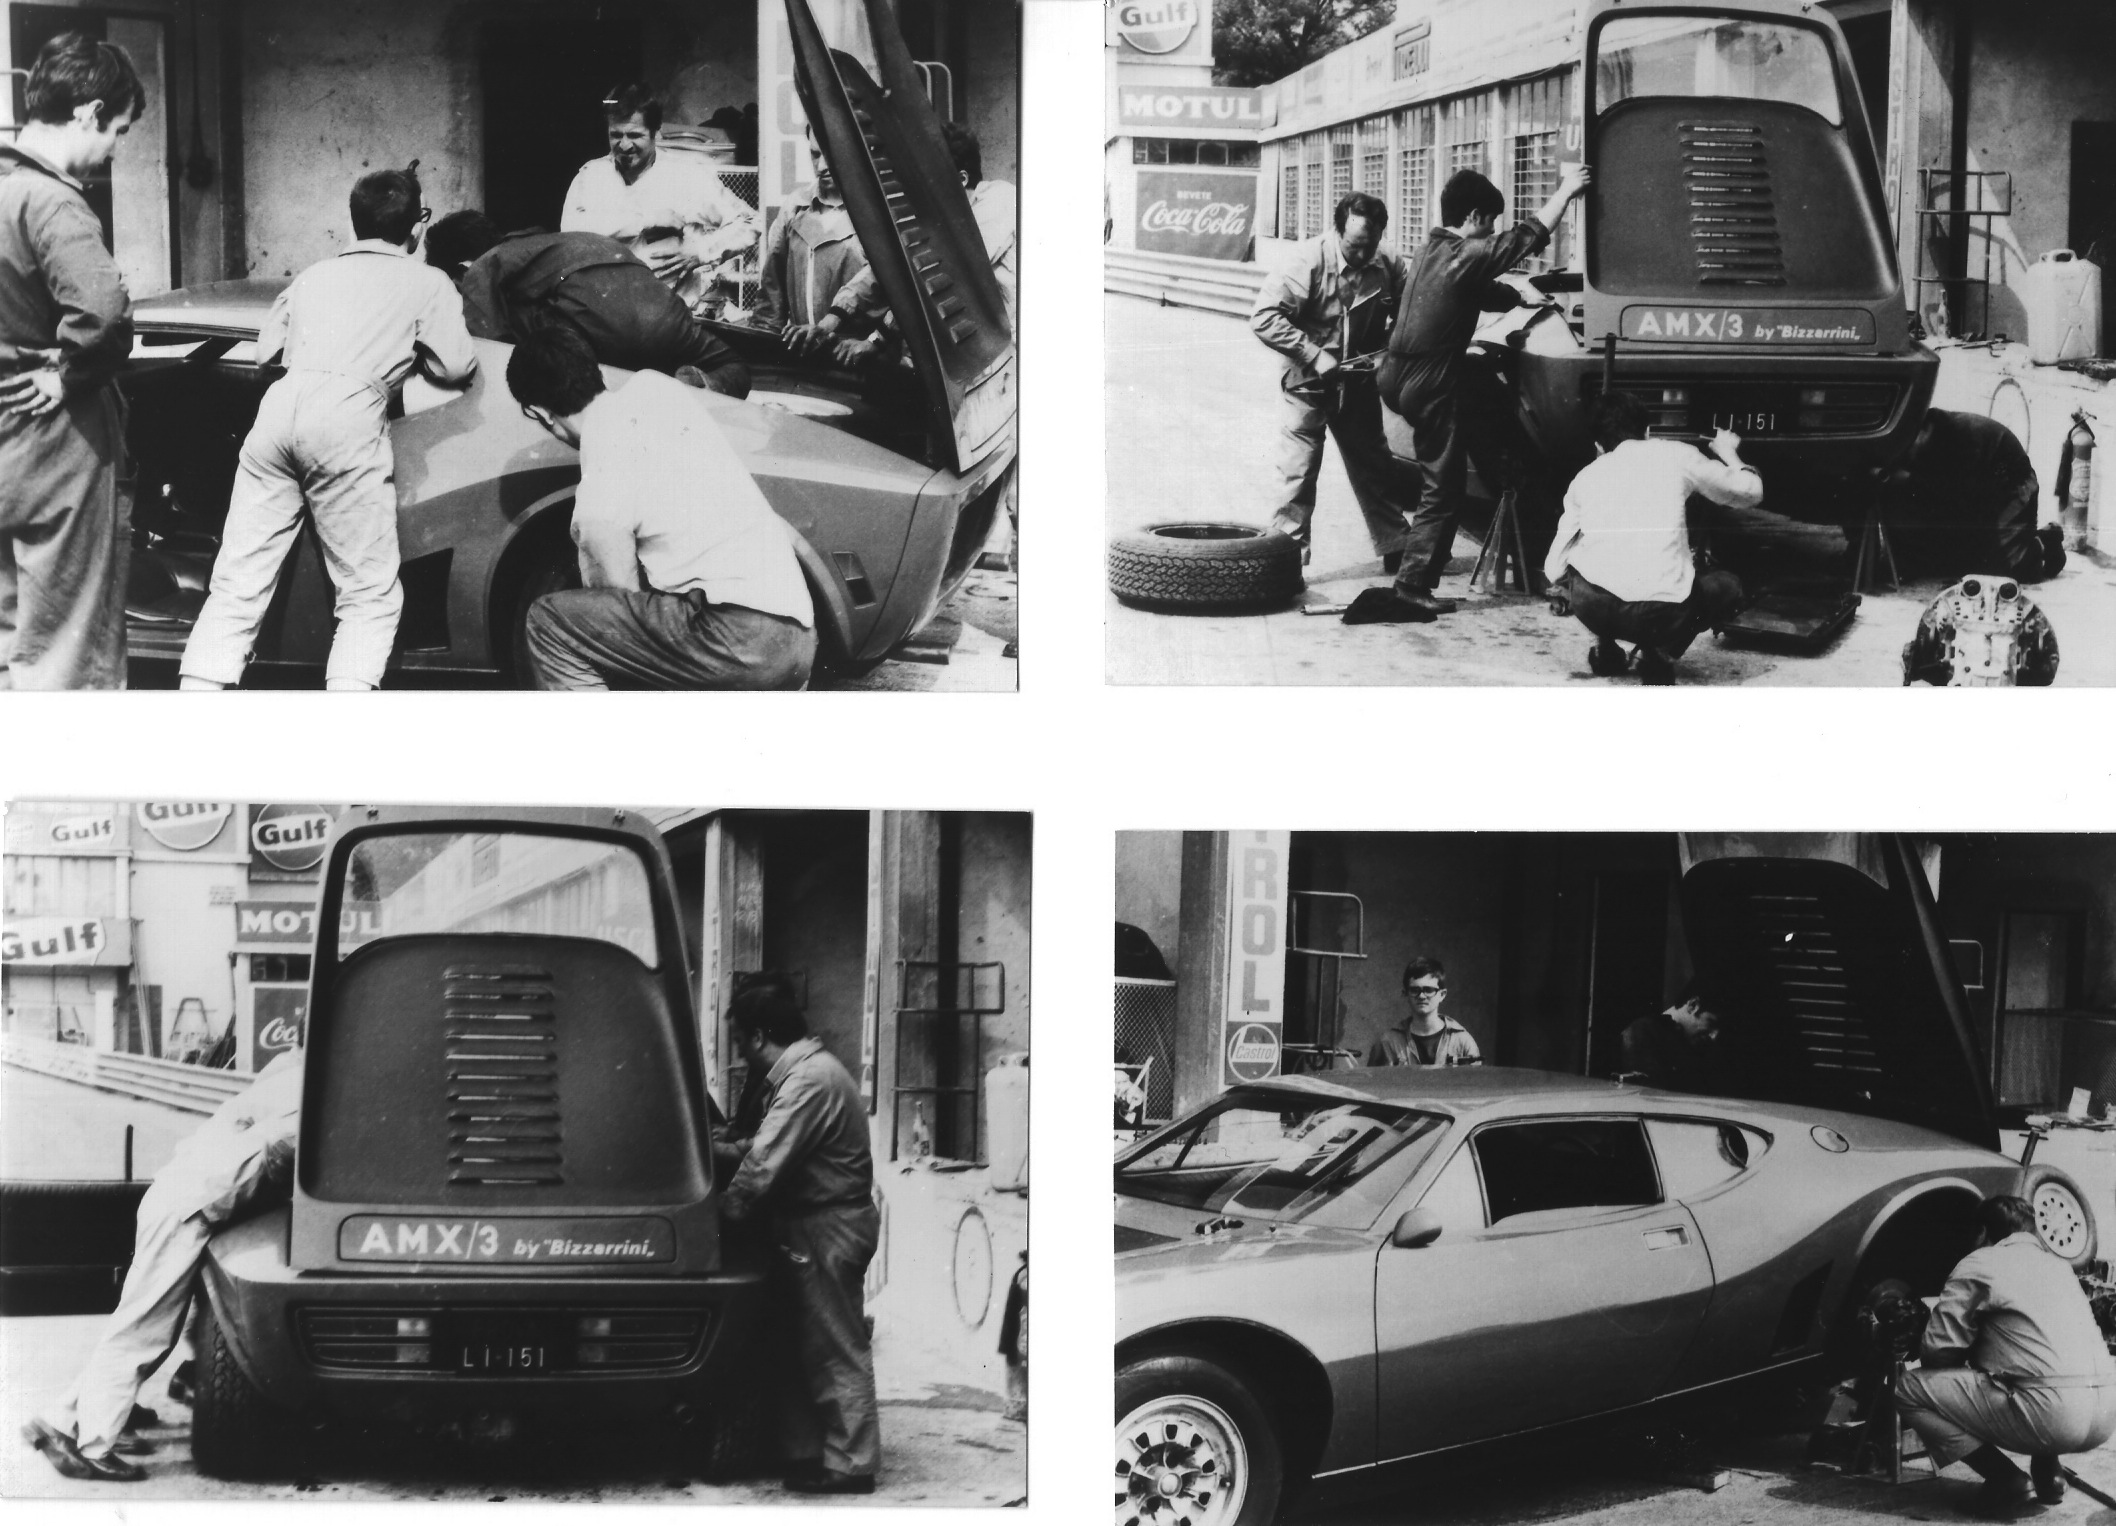 With engineering by Giotto Bizzarrini and power by the AMC 390 cid V8 